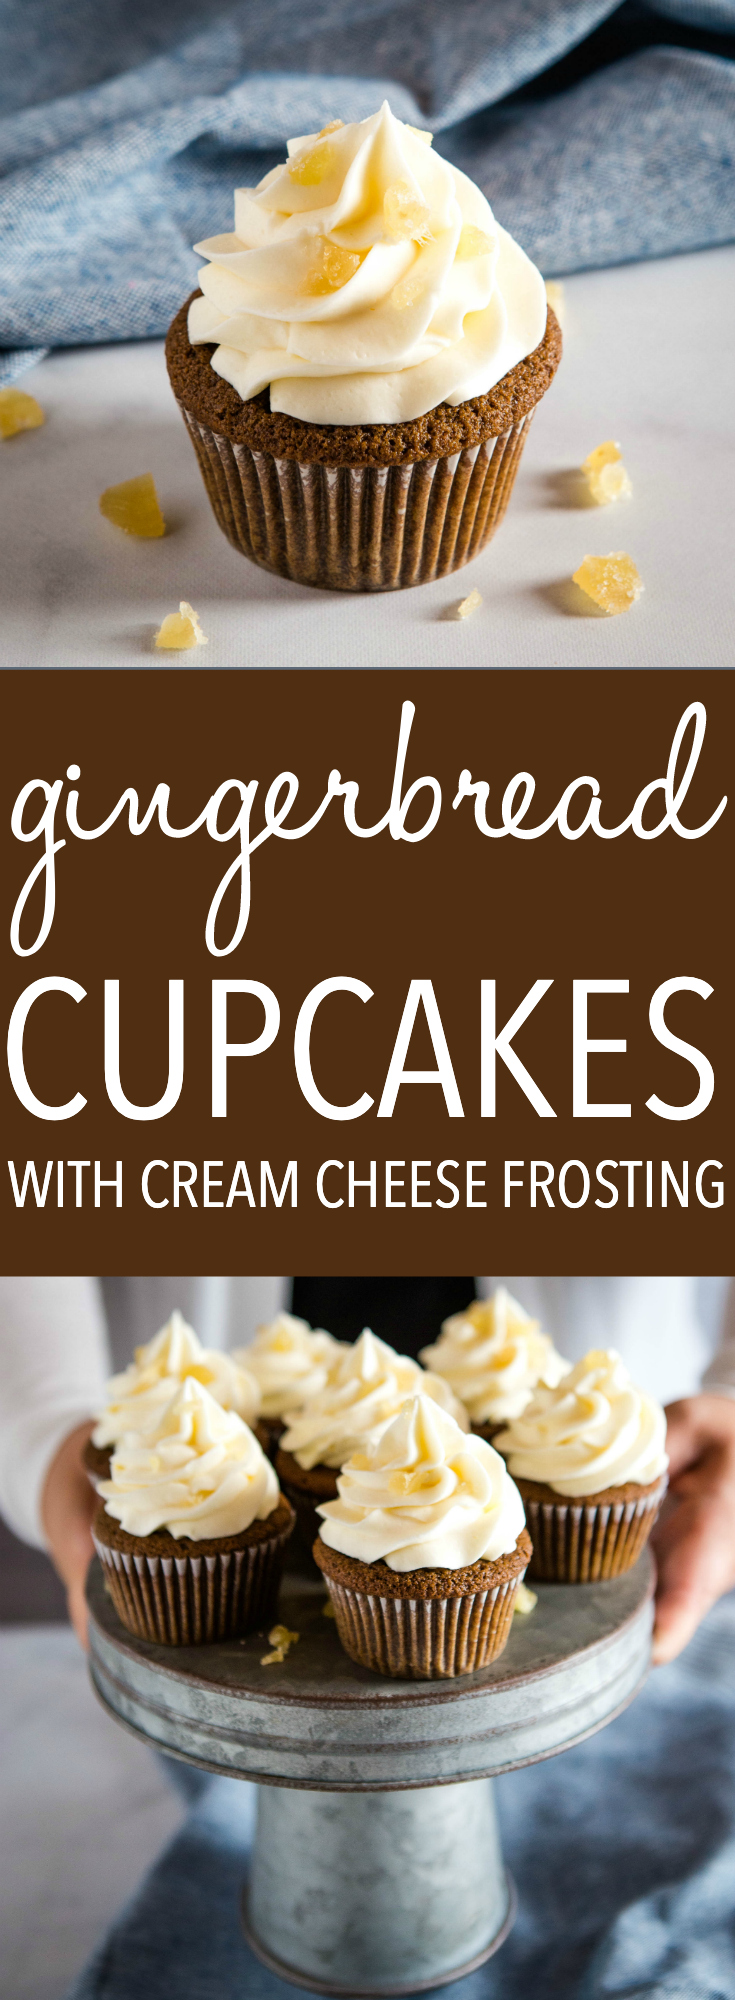 These Gingerbread Cupcakes with Cream Cheese Frosting are the perfect holiday dessert - tender cupcakes with spicy ginger and the creamiest buttercream frosting! Recipe from thebusybaker.ca! #gingerbread #cupcakes #dessert #frosting #ginger #holiday #christmas #sweet #baking #recipe via @busybakerblog